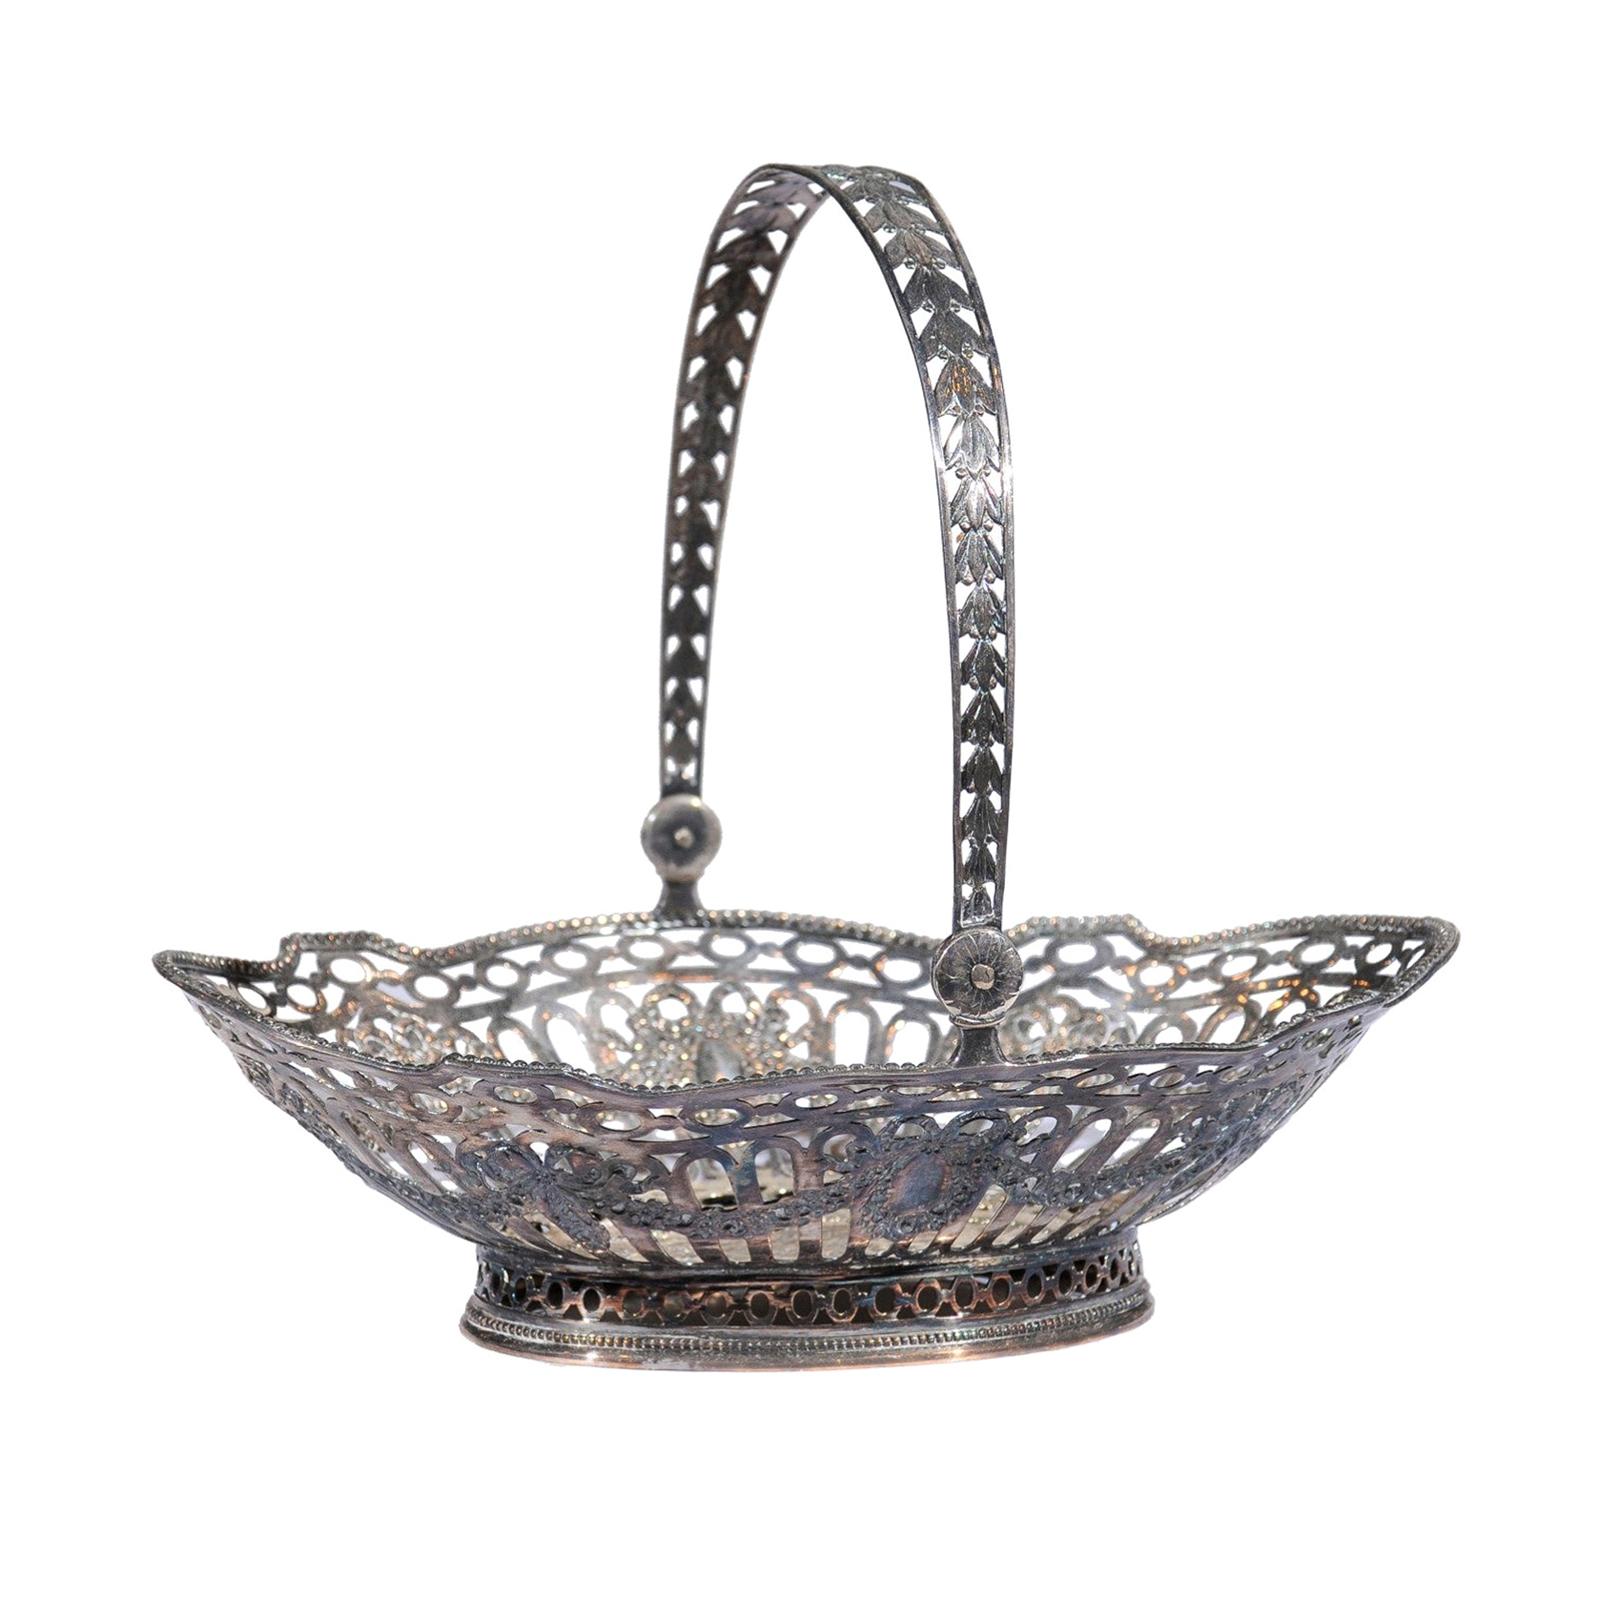 English 19th Century Silver Plated Oval Bread Basket with Putti and Garlands